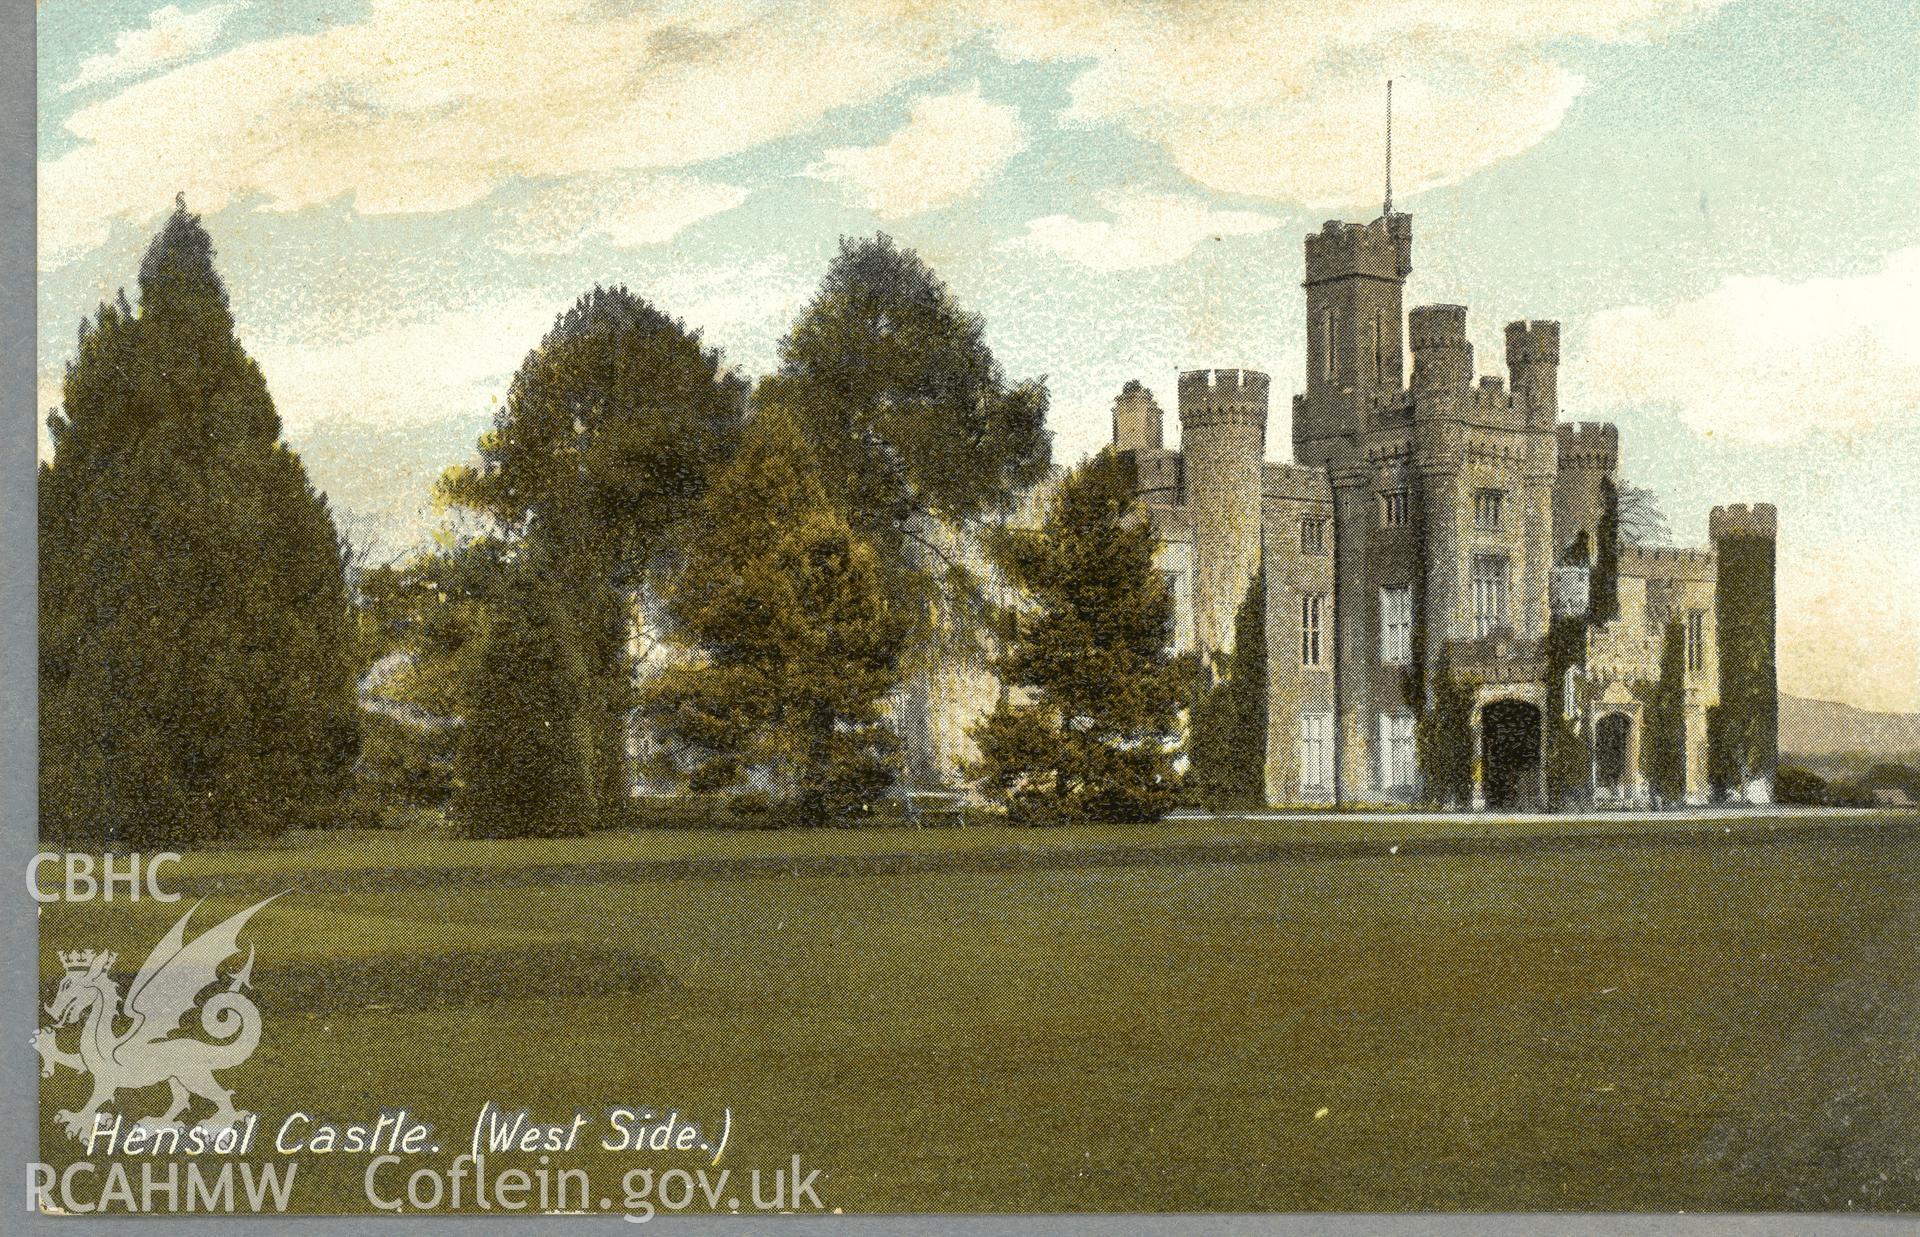 Digitised postcard image of Hensol castle, Pendoylan, "Strand" Series Published by S Willment, Pontyclun. Produced by Parks and Gardens Data Services, from an original item in the Peter Davis Collection at Parks and Gardens UK. We hold only web-resolution images of this collection, suitable for viewing on screen and for research purposes only. We do not hold the original images, or publication quality scans.